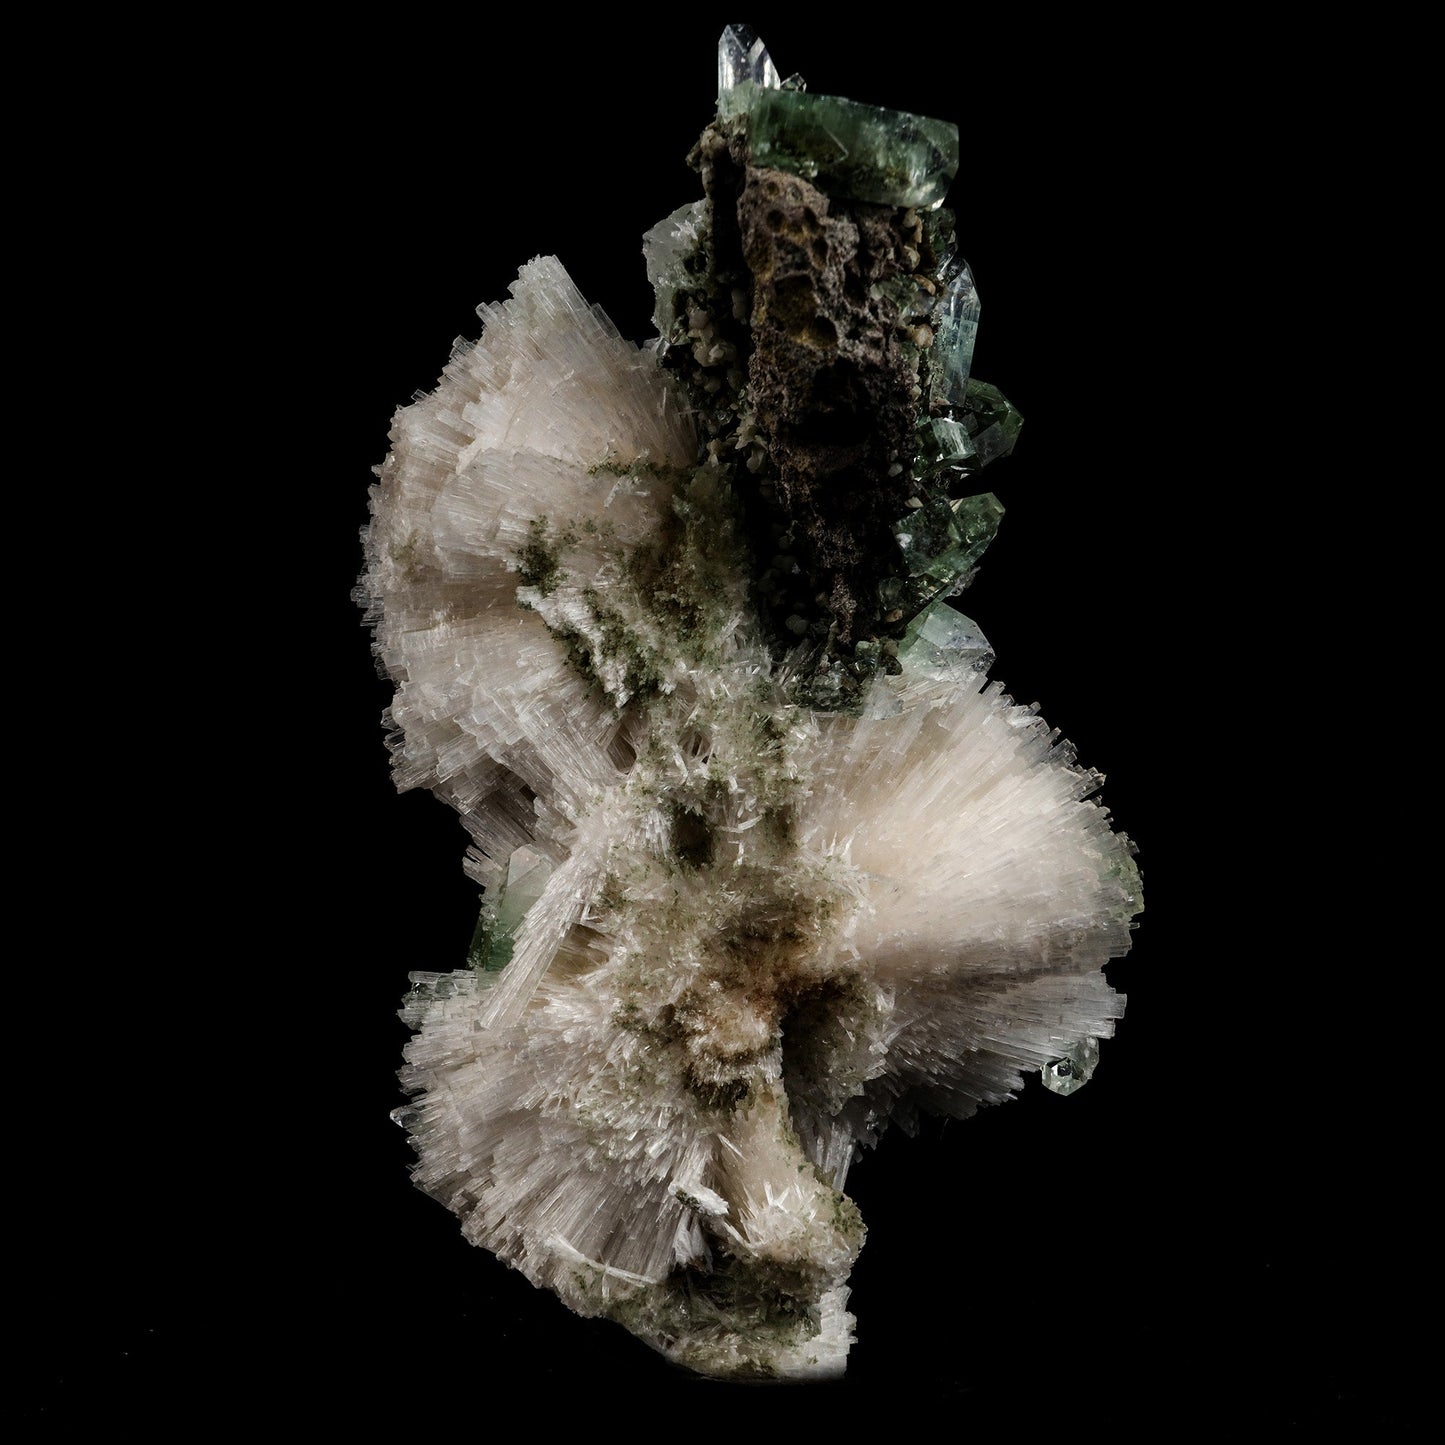 Scolecite Sprays with Green Apophyllite Natural Mineral Specimen # B …  https://www.superbminerals.us/products/scolecite-sprays-with-green-apophyllite-natural-mineral-specimen-b-5106  Features: Very rich porcupine quill spray of glassy scolecite needles is artistically set on the basalt matrix, which is covered with mint-green, frosted, Tetragonal Apophyllite crystals. Large combination material that is both outstanding and rare in today's market. Primary Mineral(s): Apophyllite